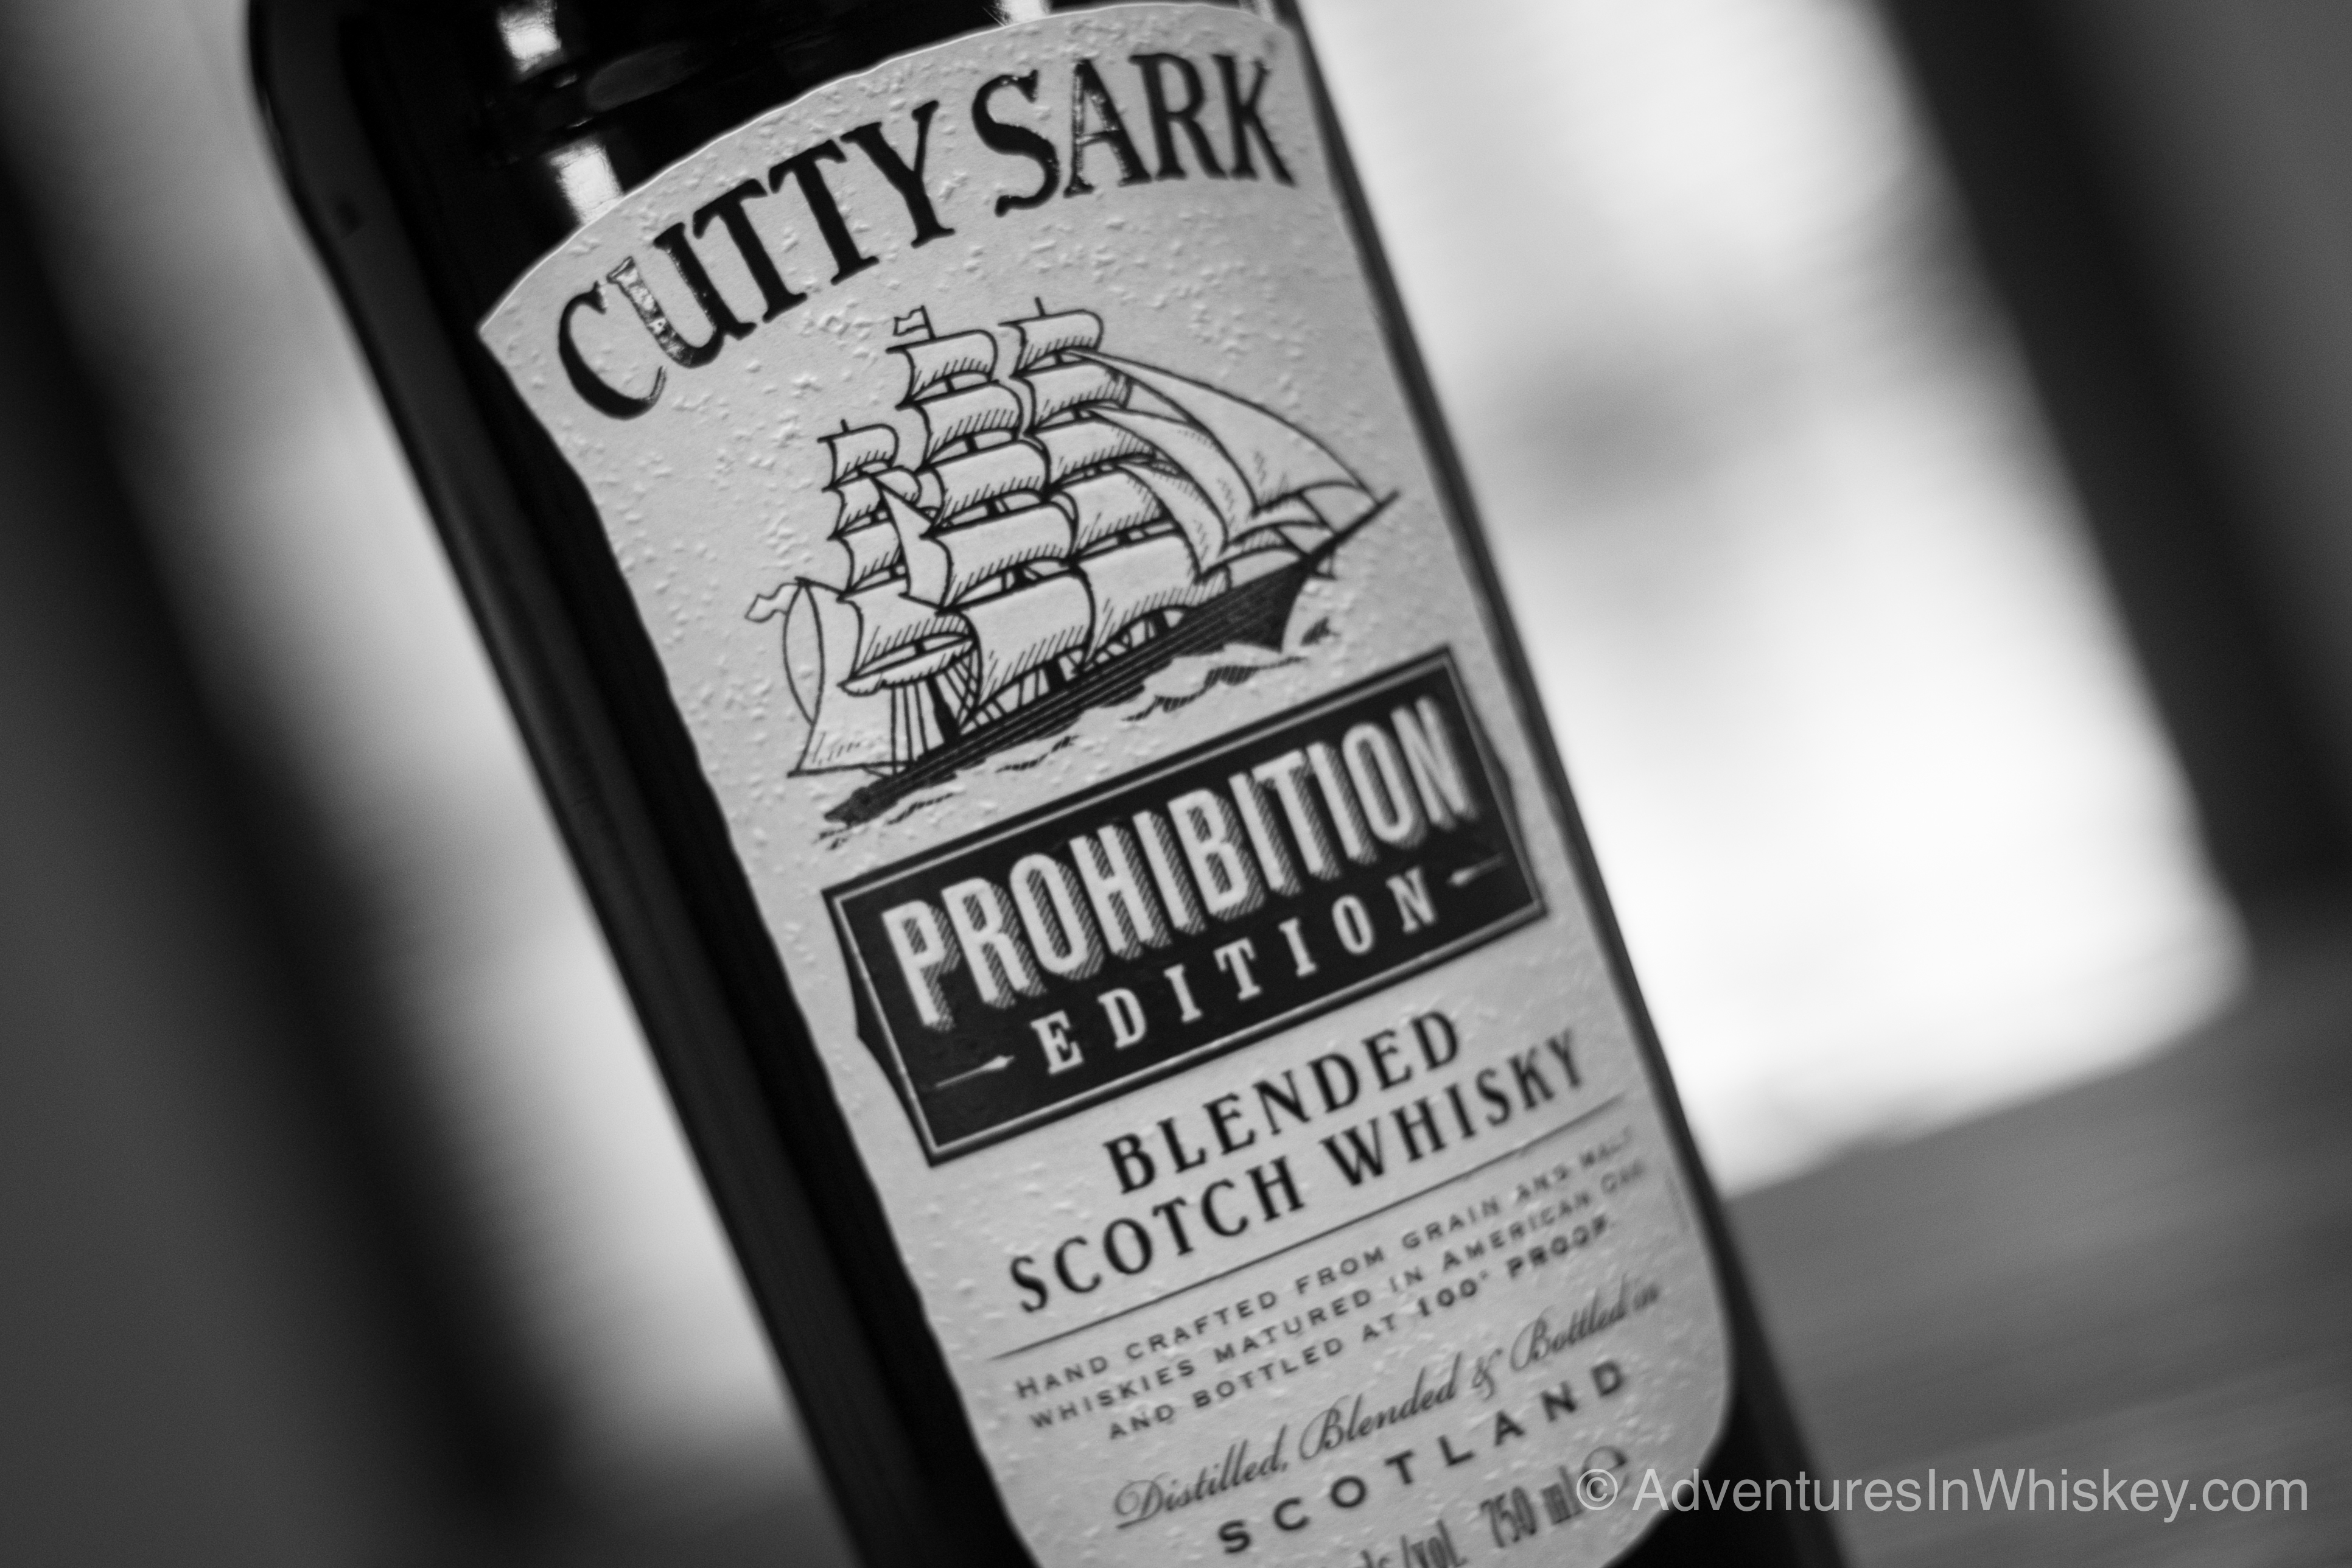 Cutty Sark Cutty Sark Prohibition Edition Blended Scotch Whisky Review Adventures In Whiskey